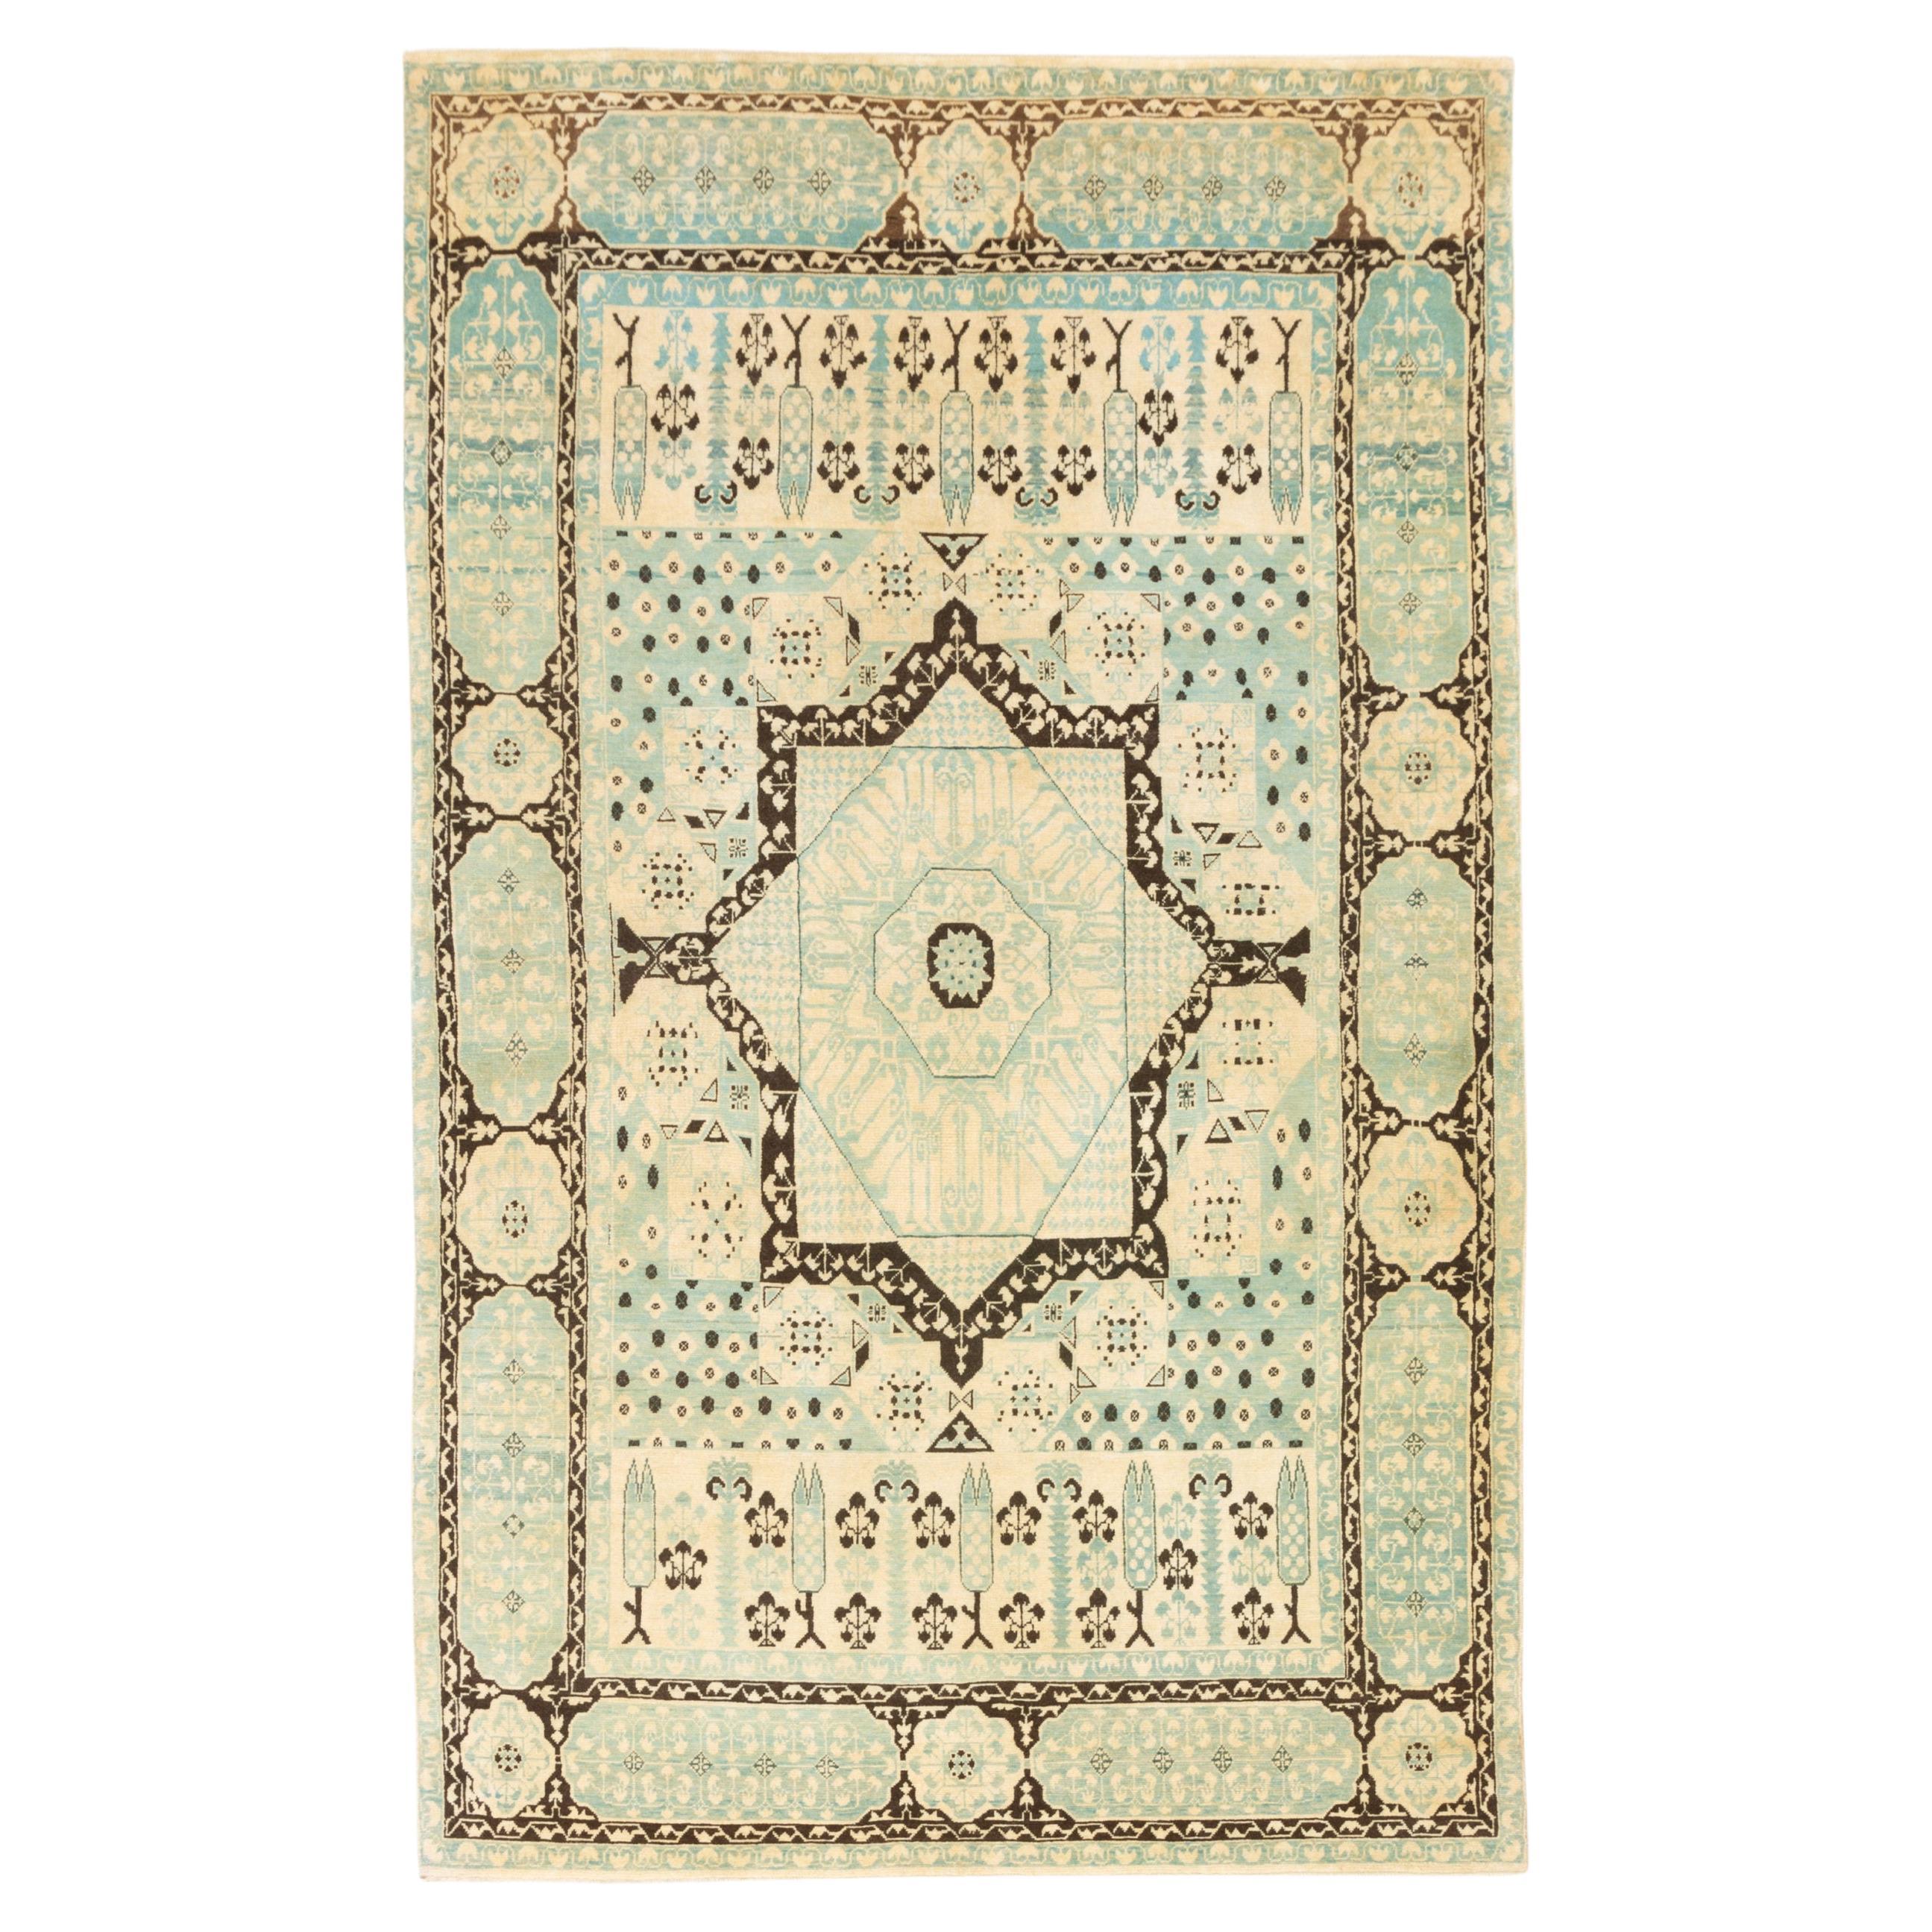 Ararat Rugs Mamluk Rug with Palm Trees and Cypresses Revival Carpet Natural Dyed For Sale